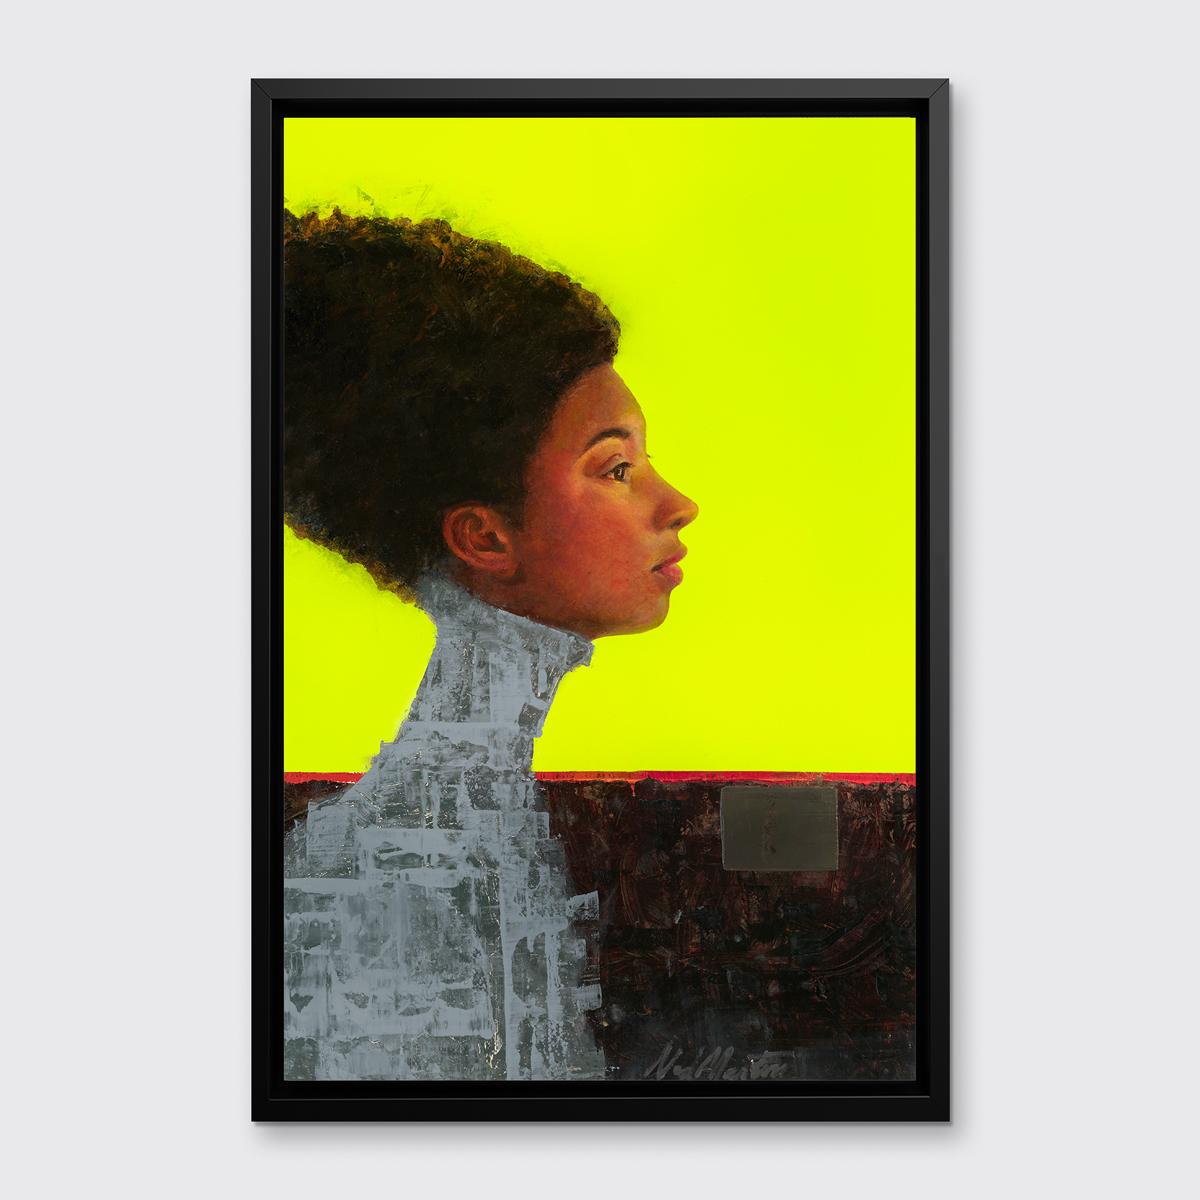 This limited edition print by Ned Martin is a contemporary abstract portrait. Part of his Spirits Through Time series, it features a woman in profile - her face and hair are rendered realistically while her neck and shoulders, and the background of